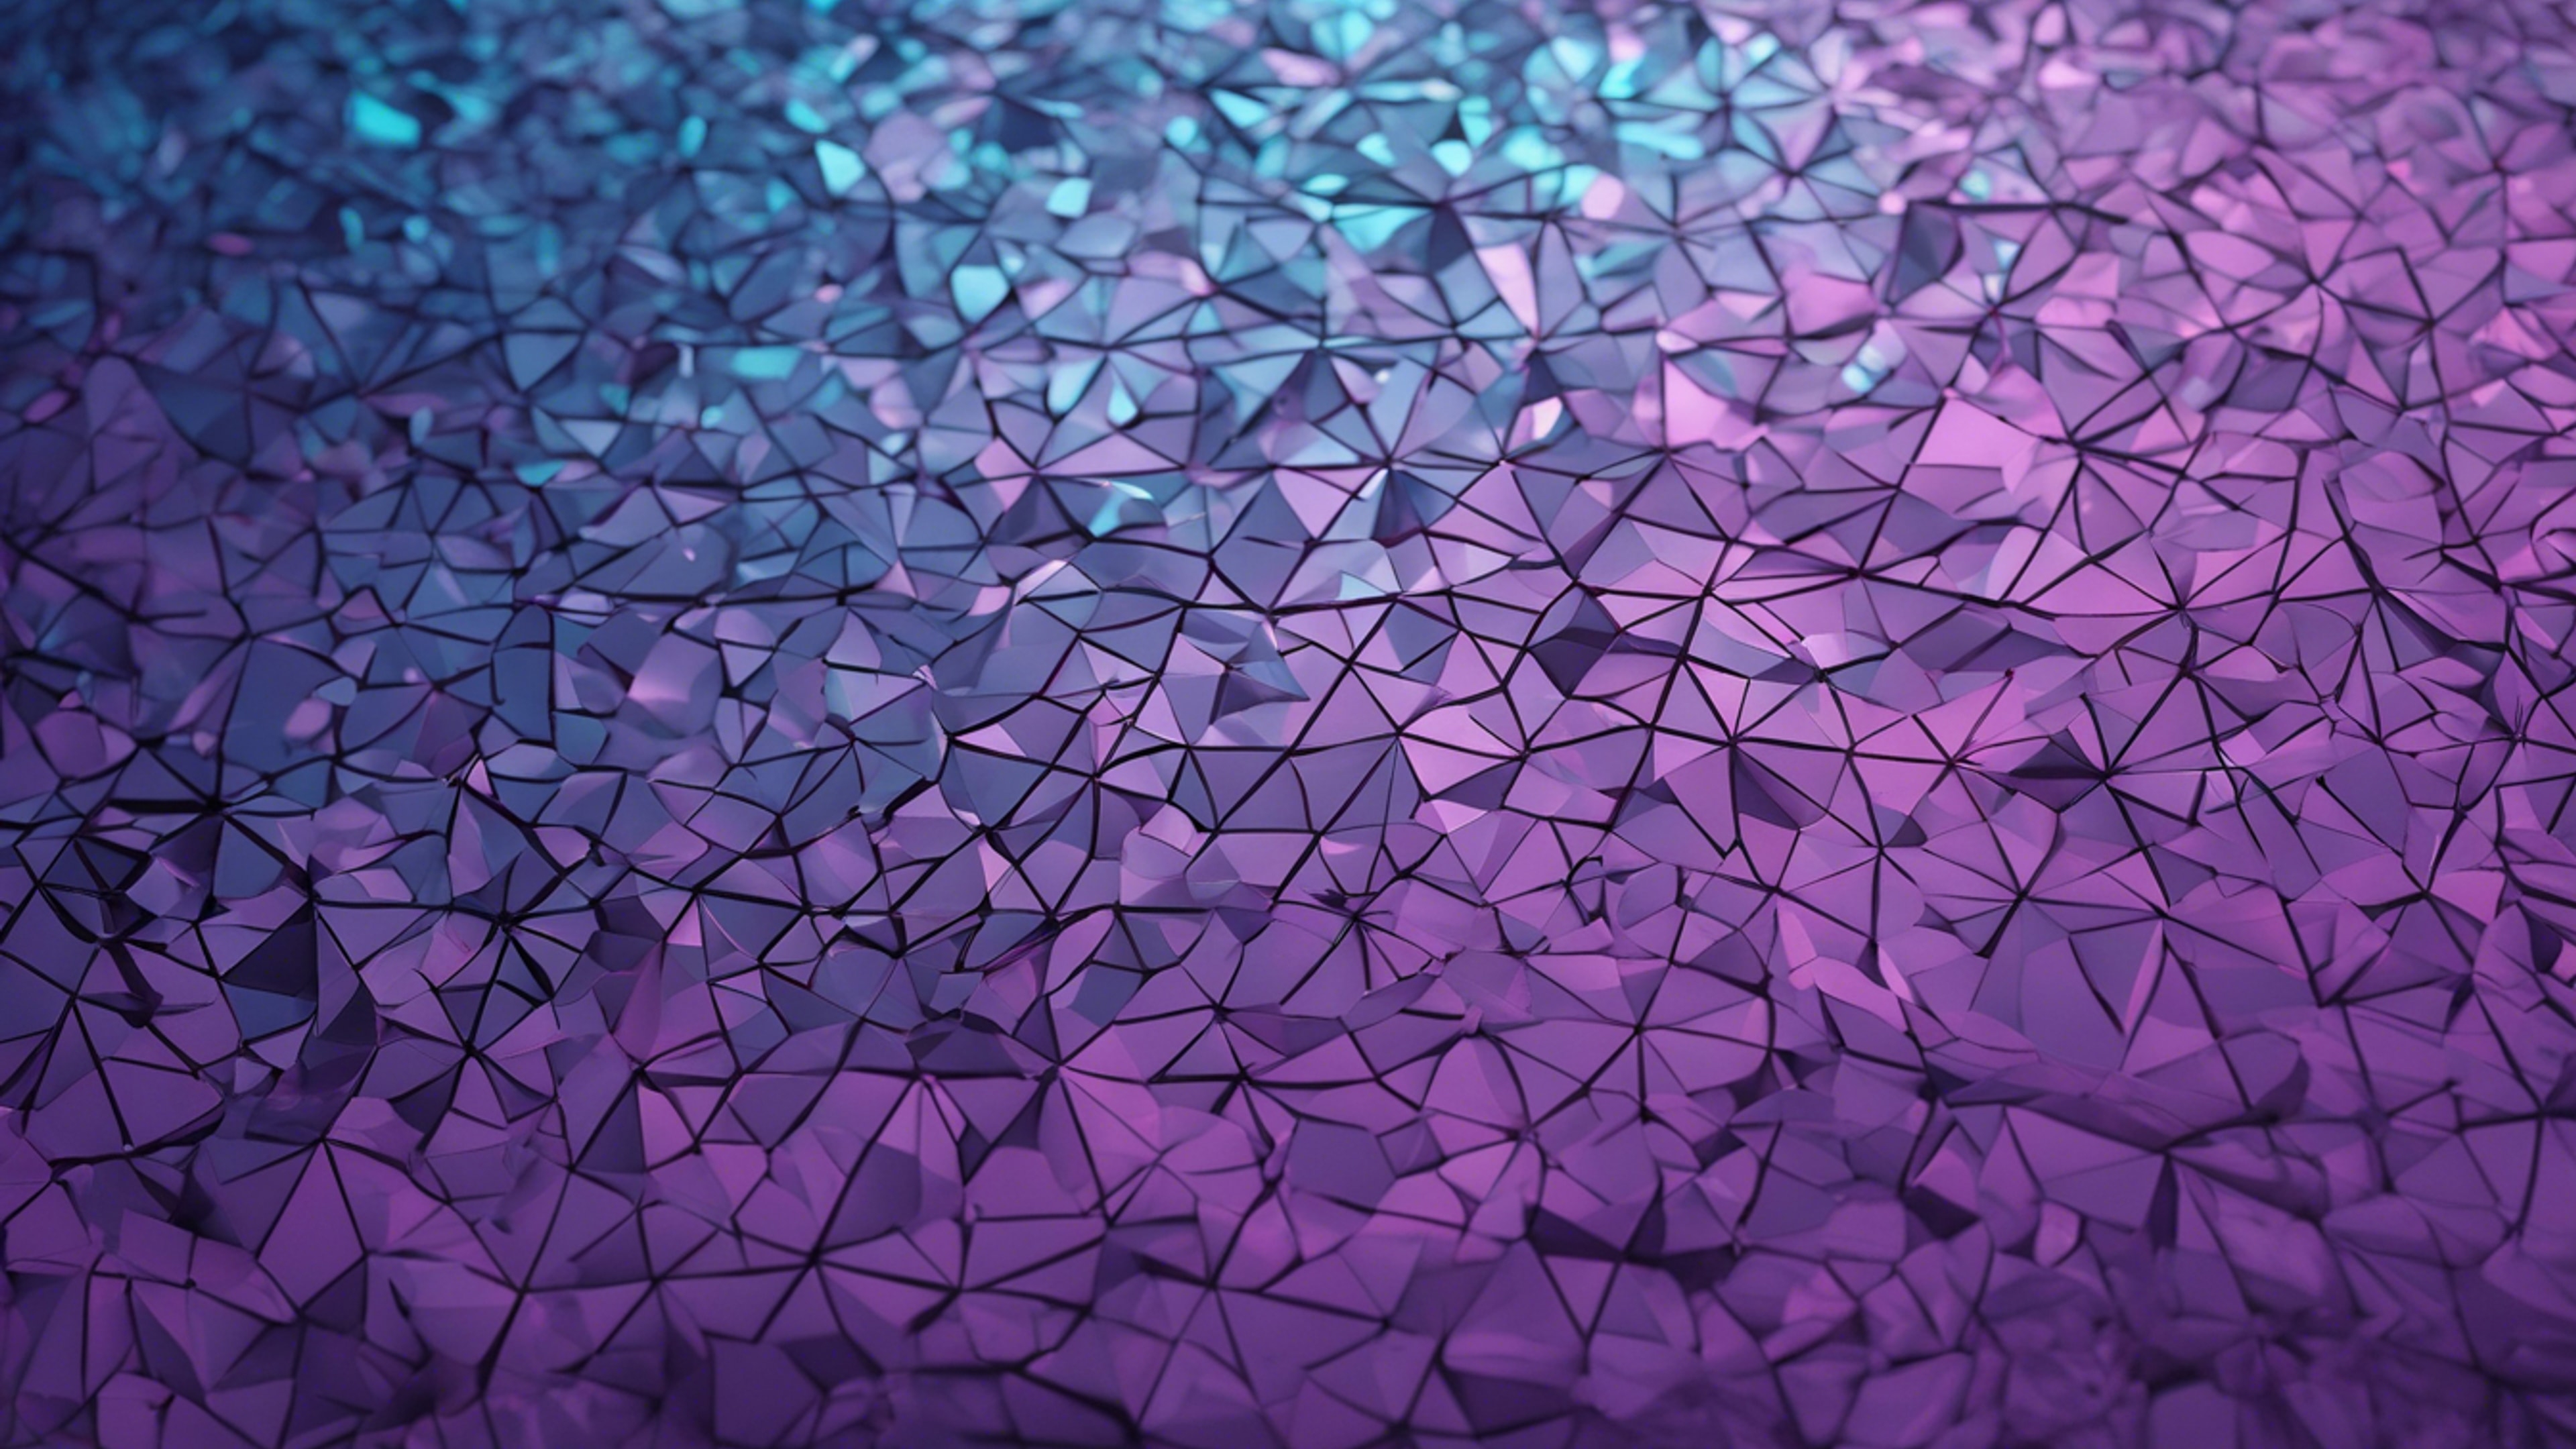 A minimalistic geometric pattern with gradients of cool blues and rich purples. Behang[0965c8f37dc94faa9227]